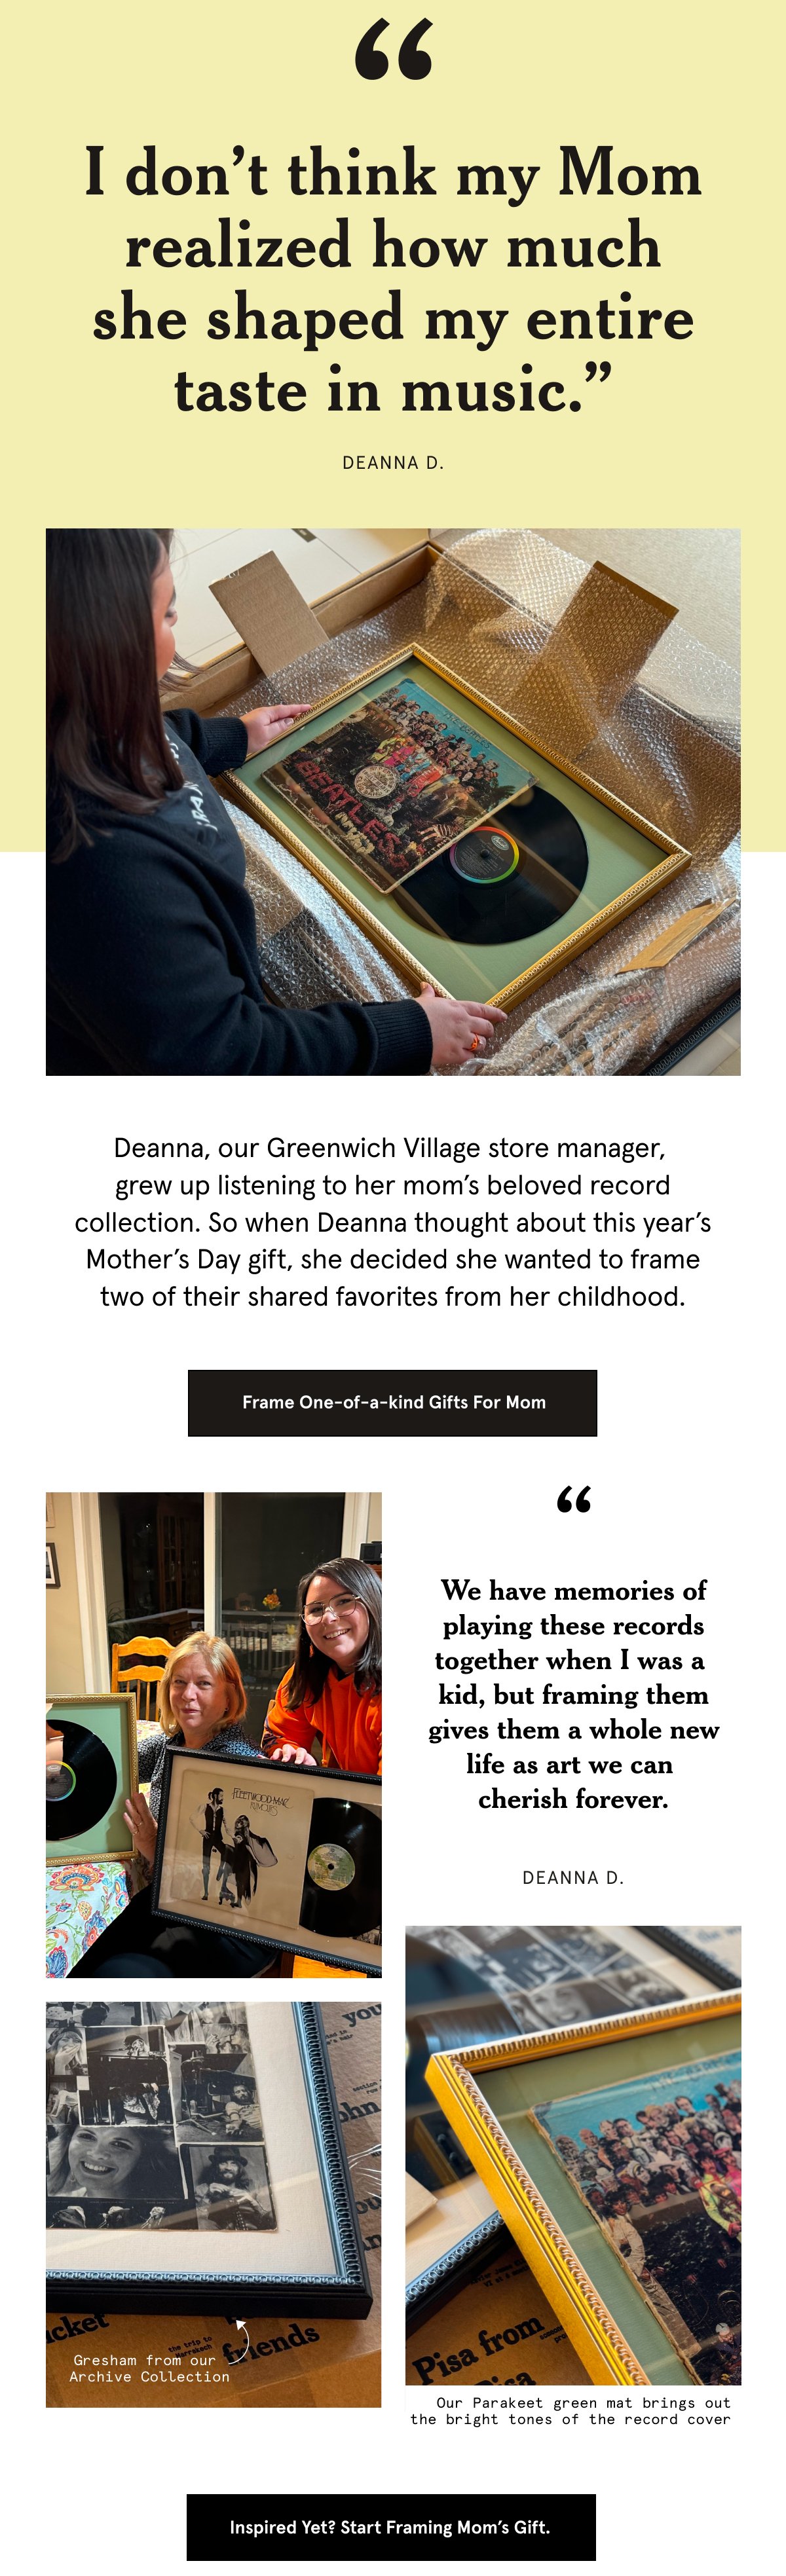 Deanna, our Greenwich Village store manager, grew up listening to her mom’s beloved record collection. So when Deanna thought about this year’s Mother’s Day gift, she decided she wanted to frame two of their shared favorites from her childhood. Frame On-of-a-kind Gifts For Mom.